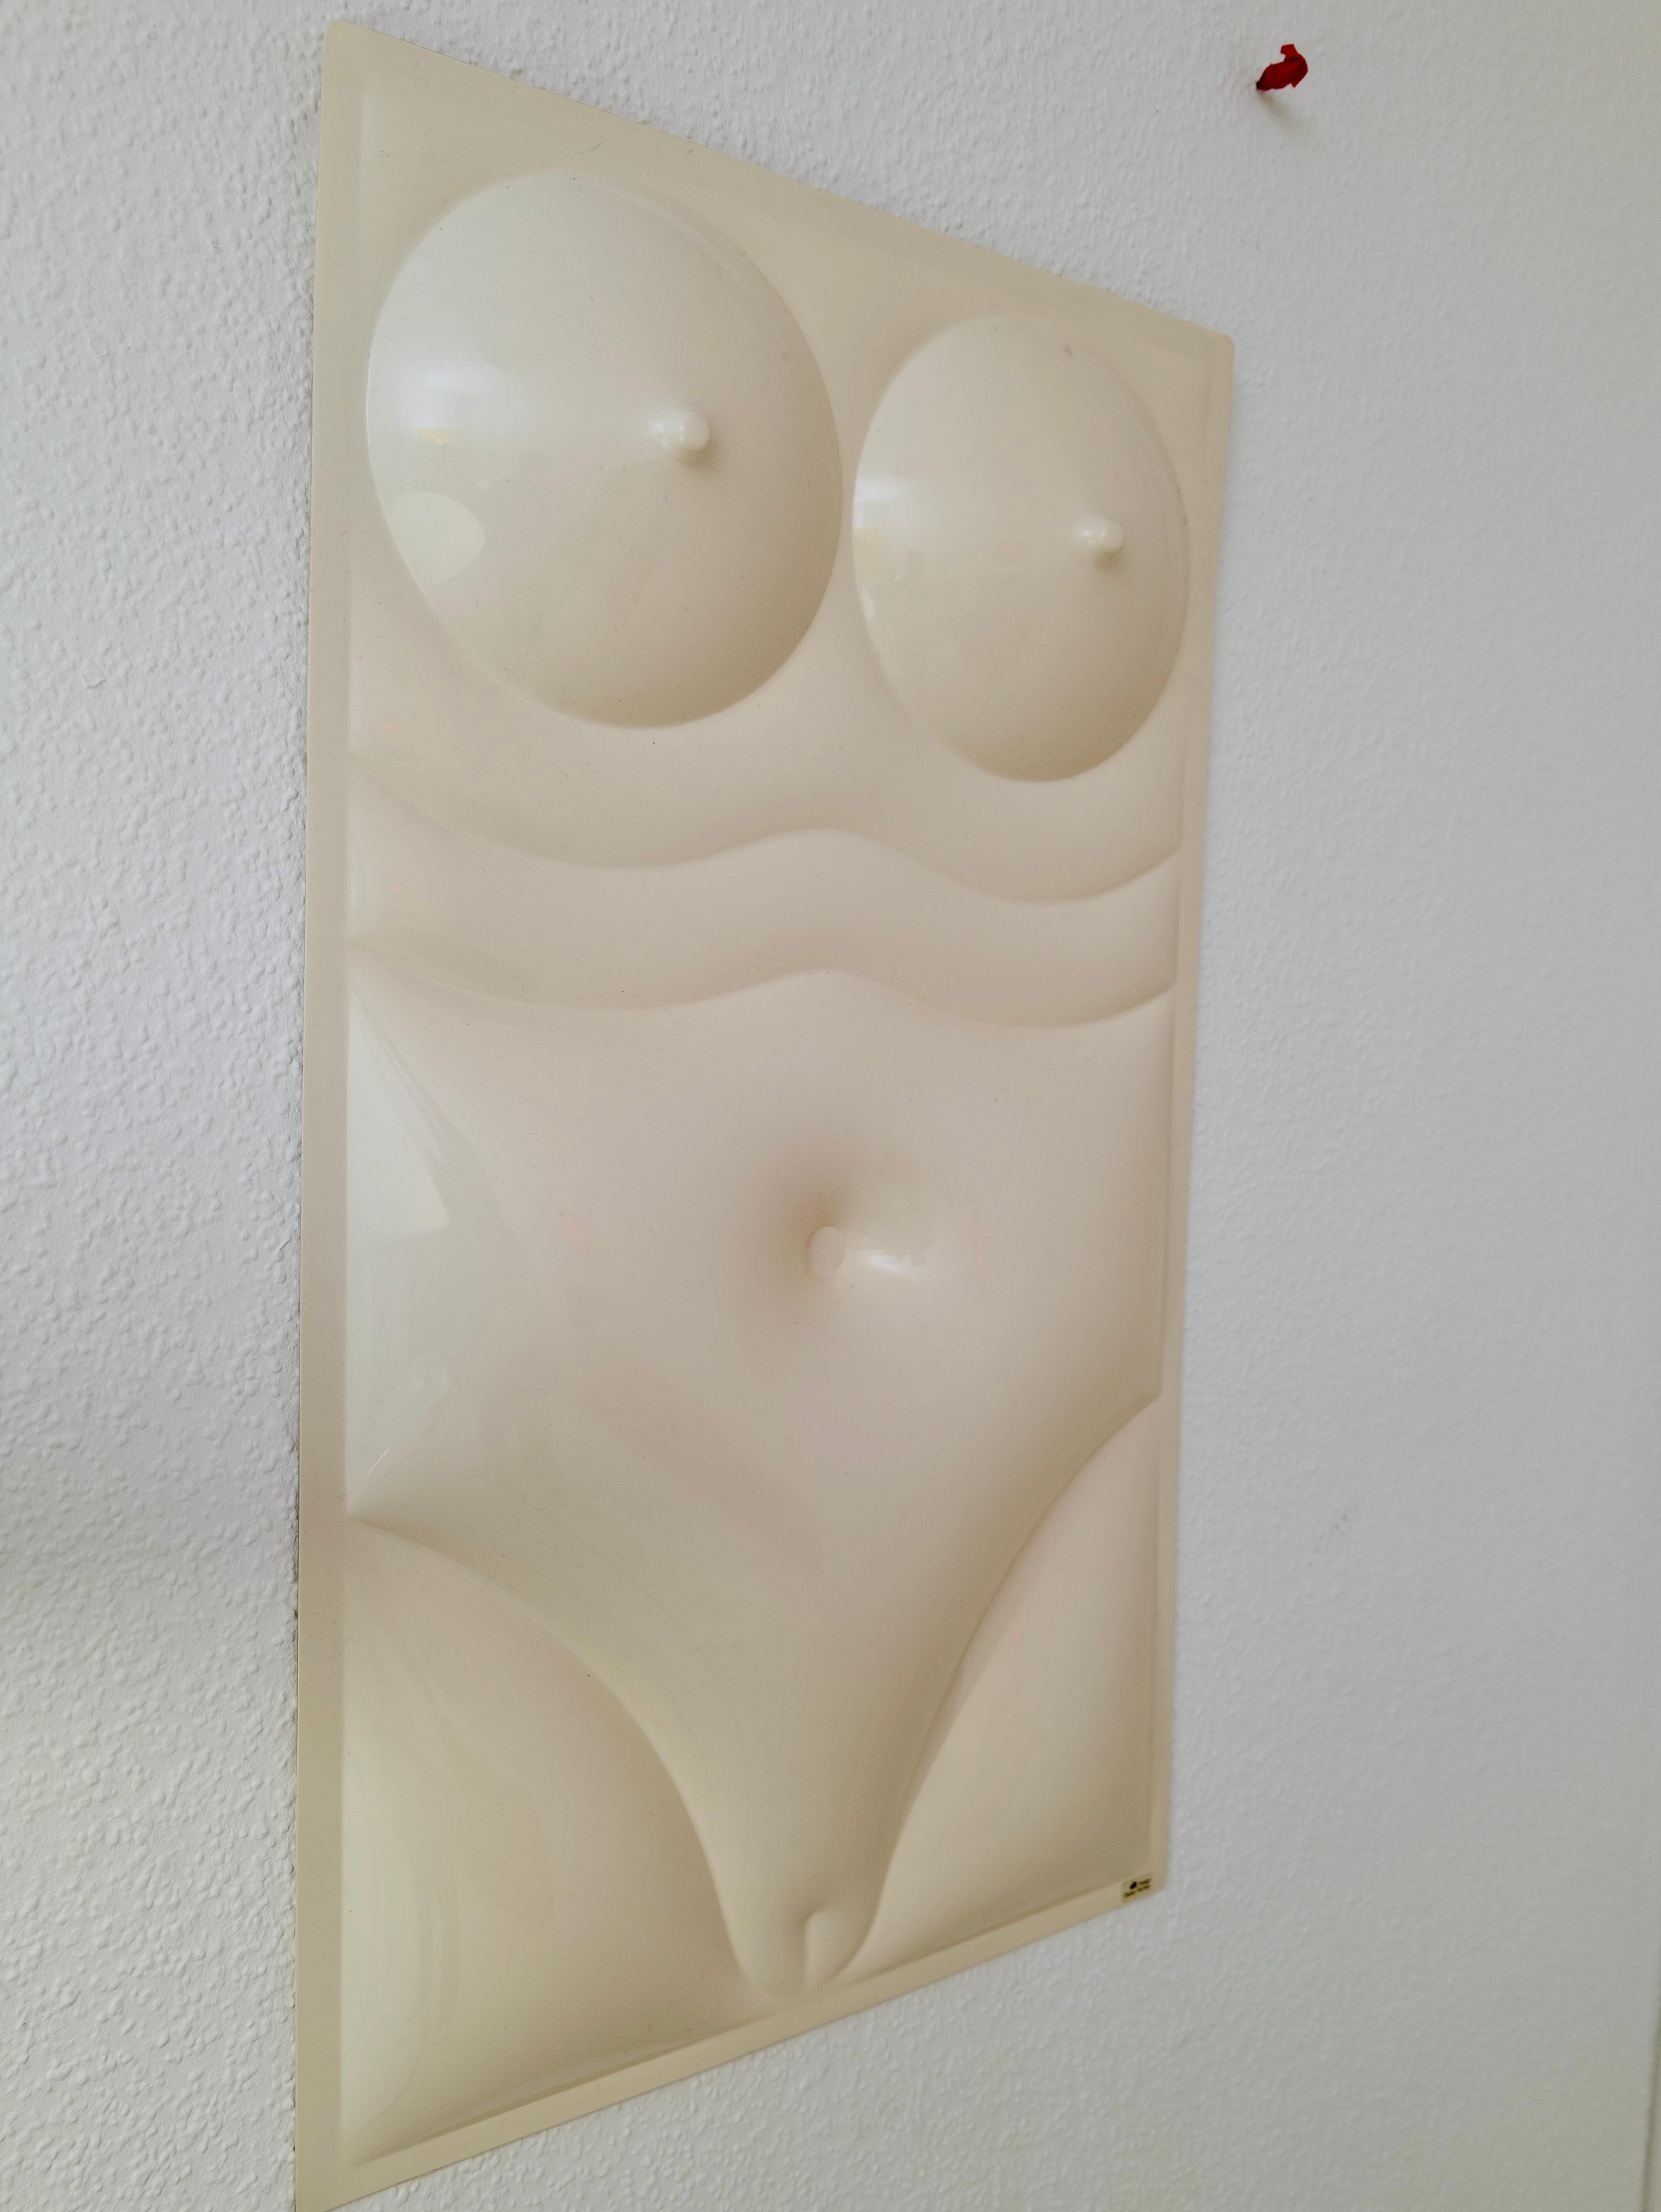 rare space age wall art made by a German Designerf from the era: Dieter Richter Design made in the 1970s.
good condition without cracks or chips.

Good dimensions:
93 cm x 54 cm x 6 cm 